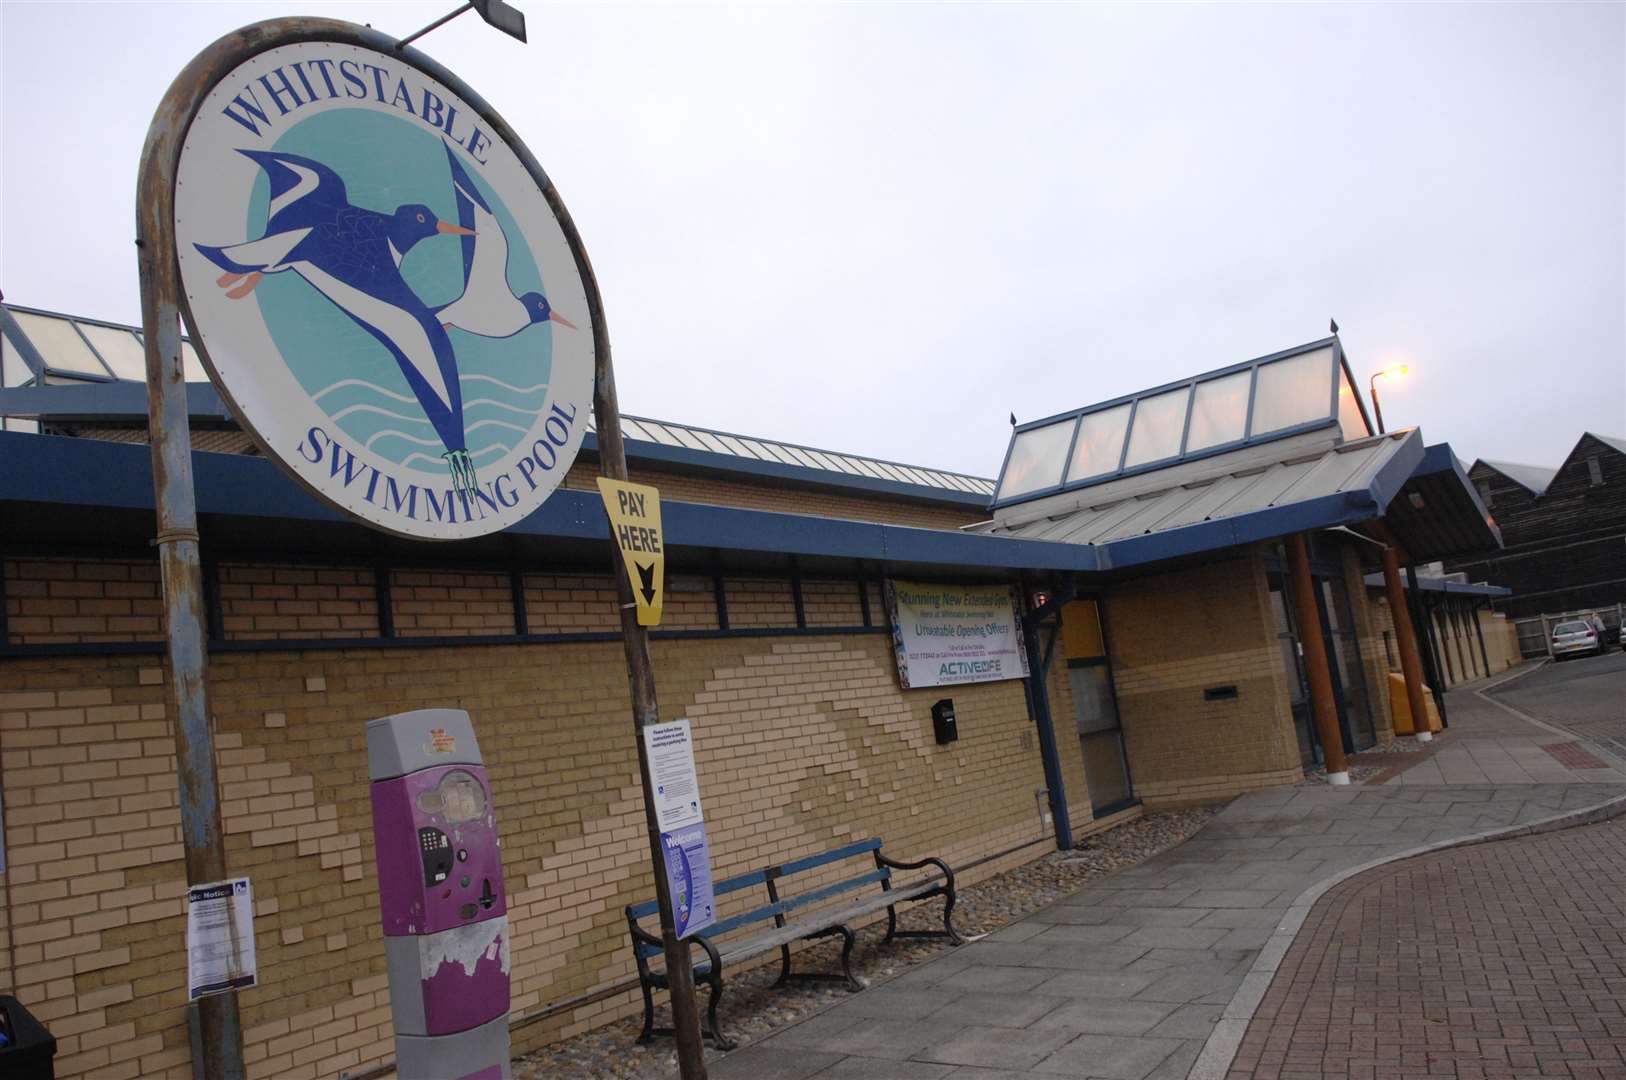 The fitness studio would be built next to Whitstable swimming pool